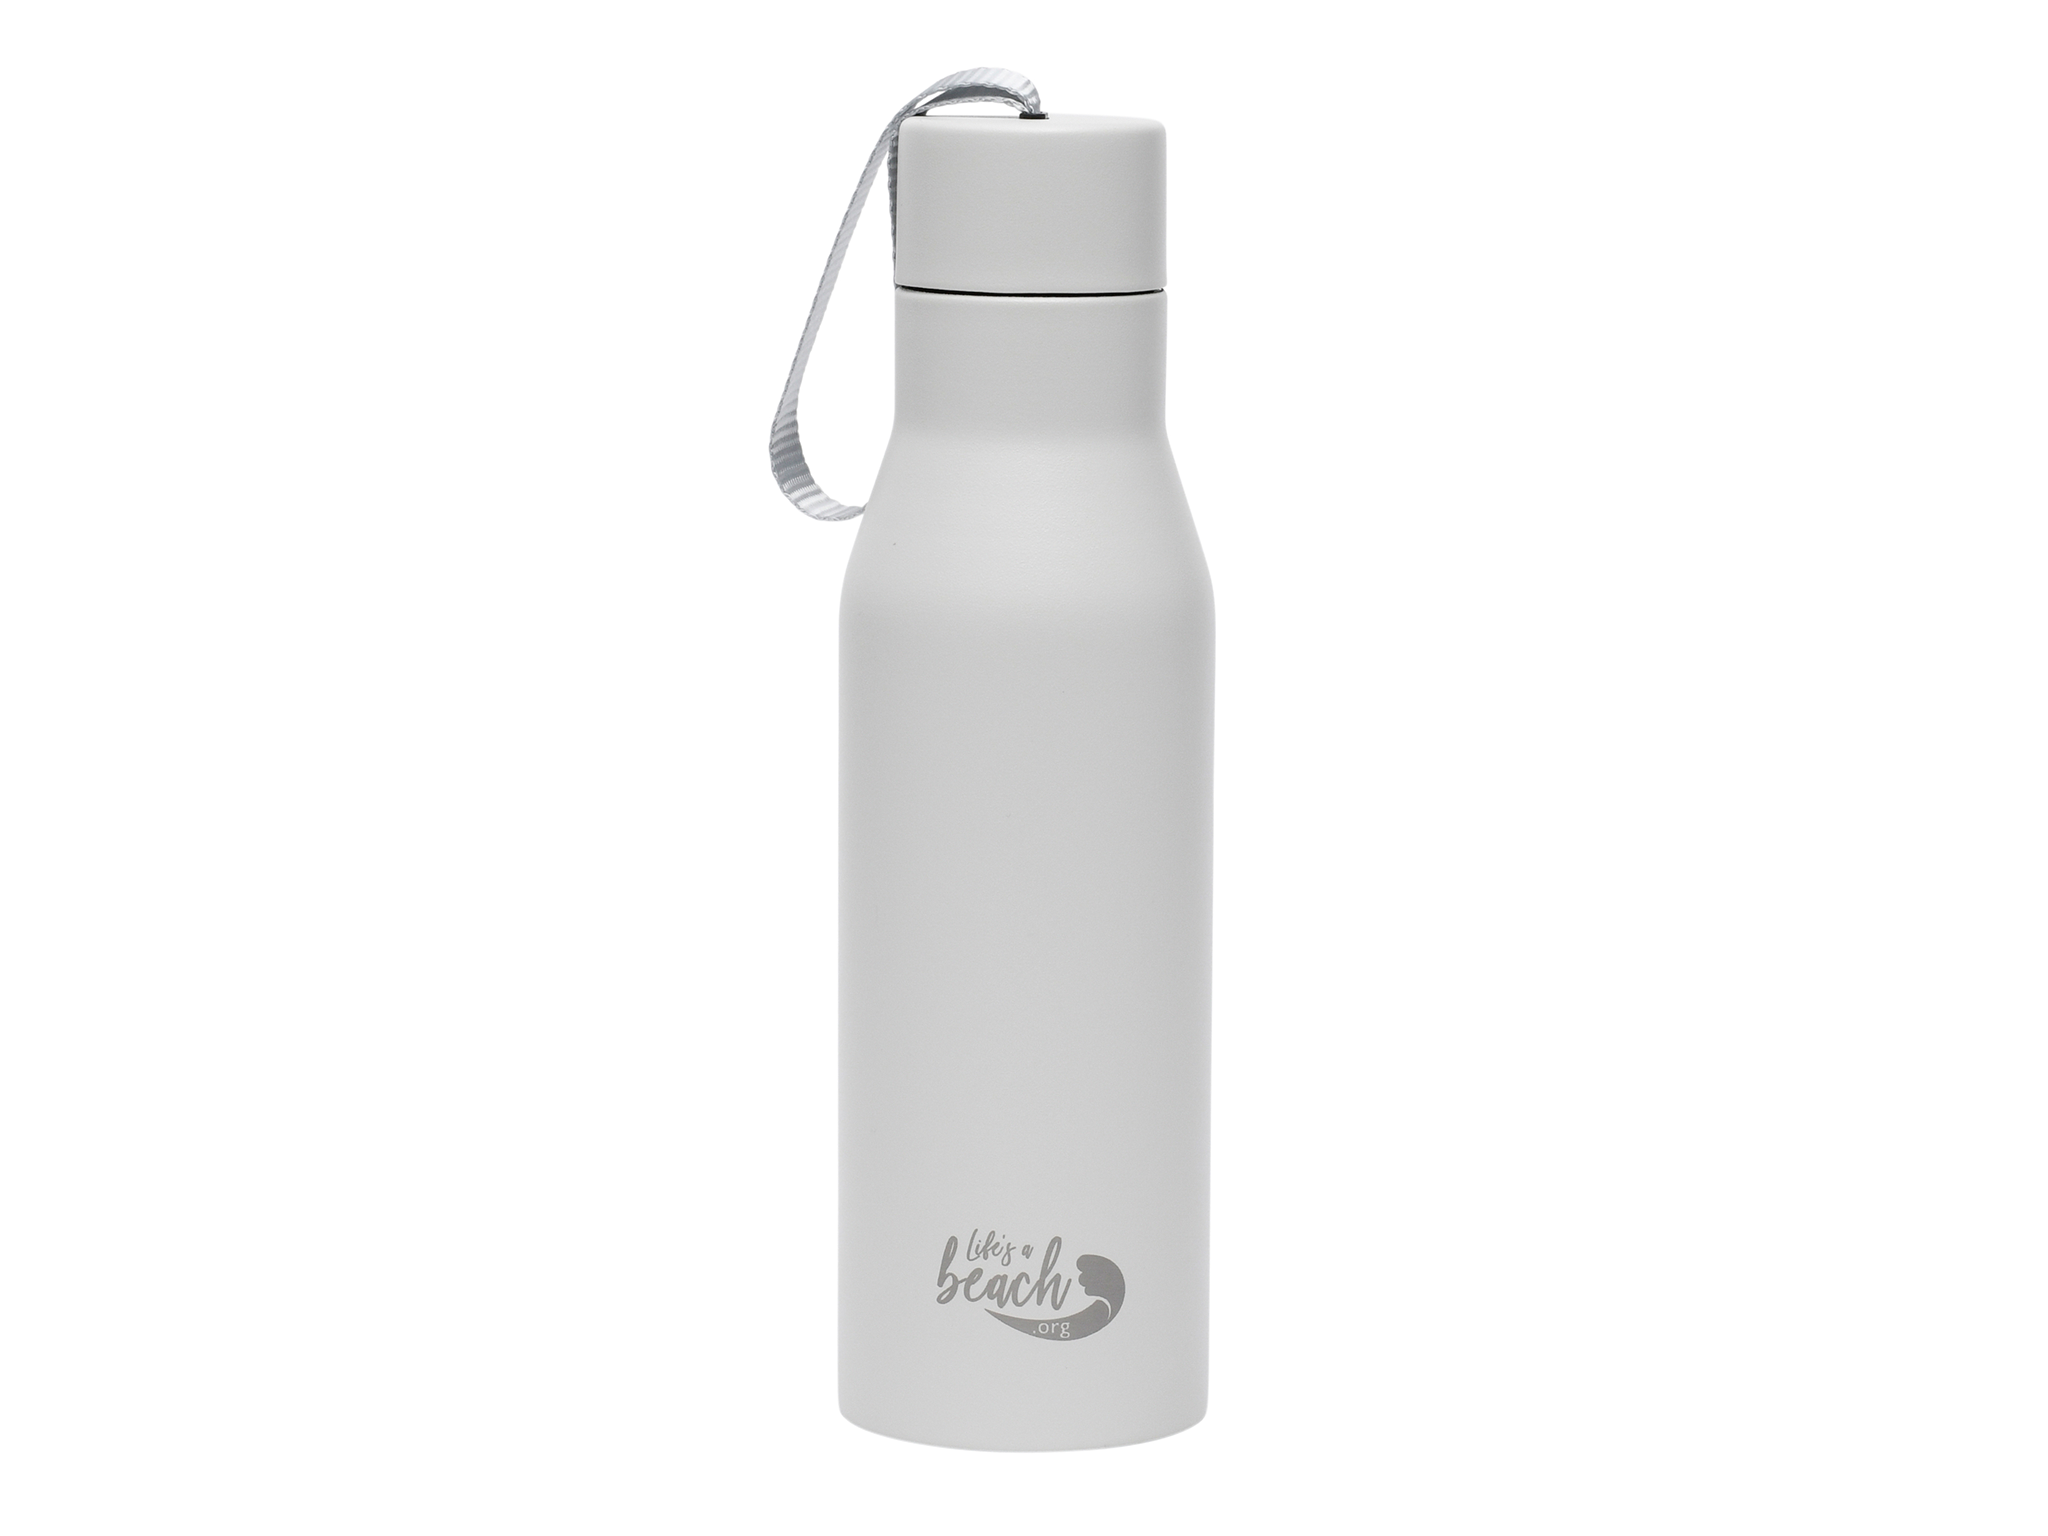 ProCook life’s a beach stainless steel water bottle